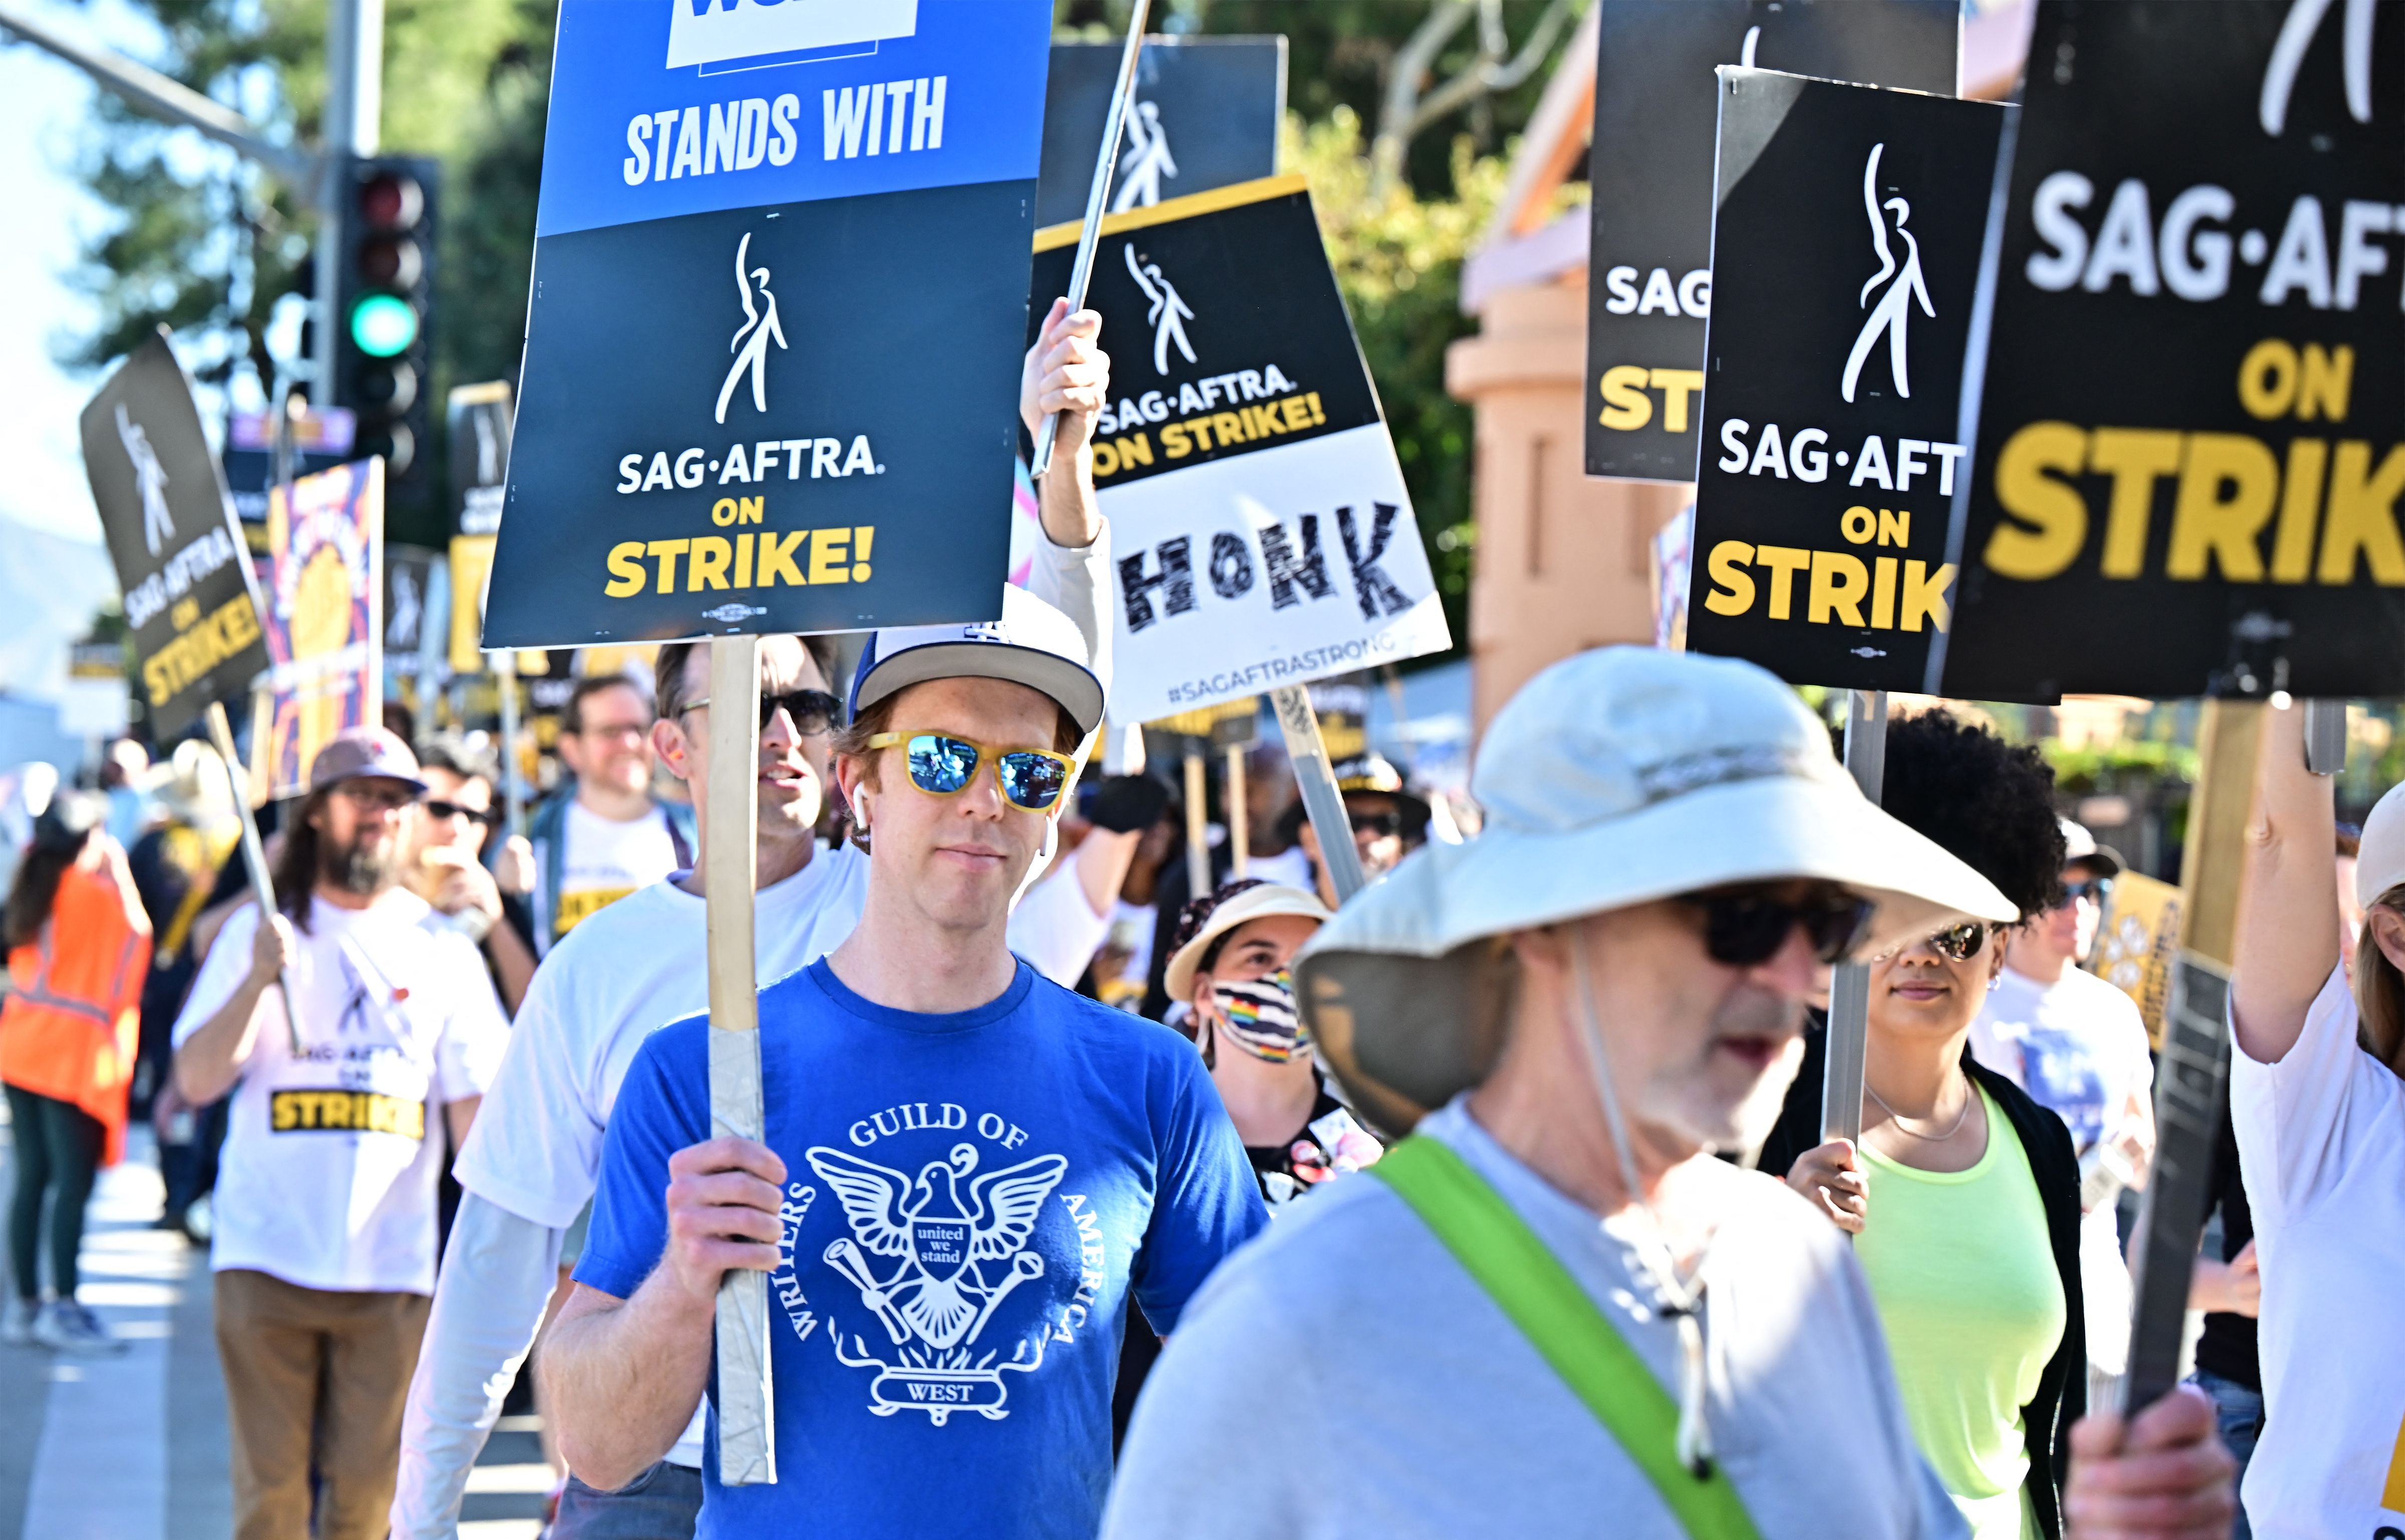 SAG-AFTRA members have been on strike since July, with AI being one of the biggest issues on the table